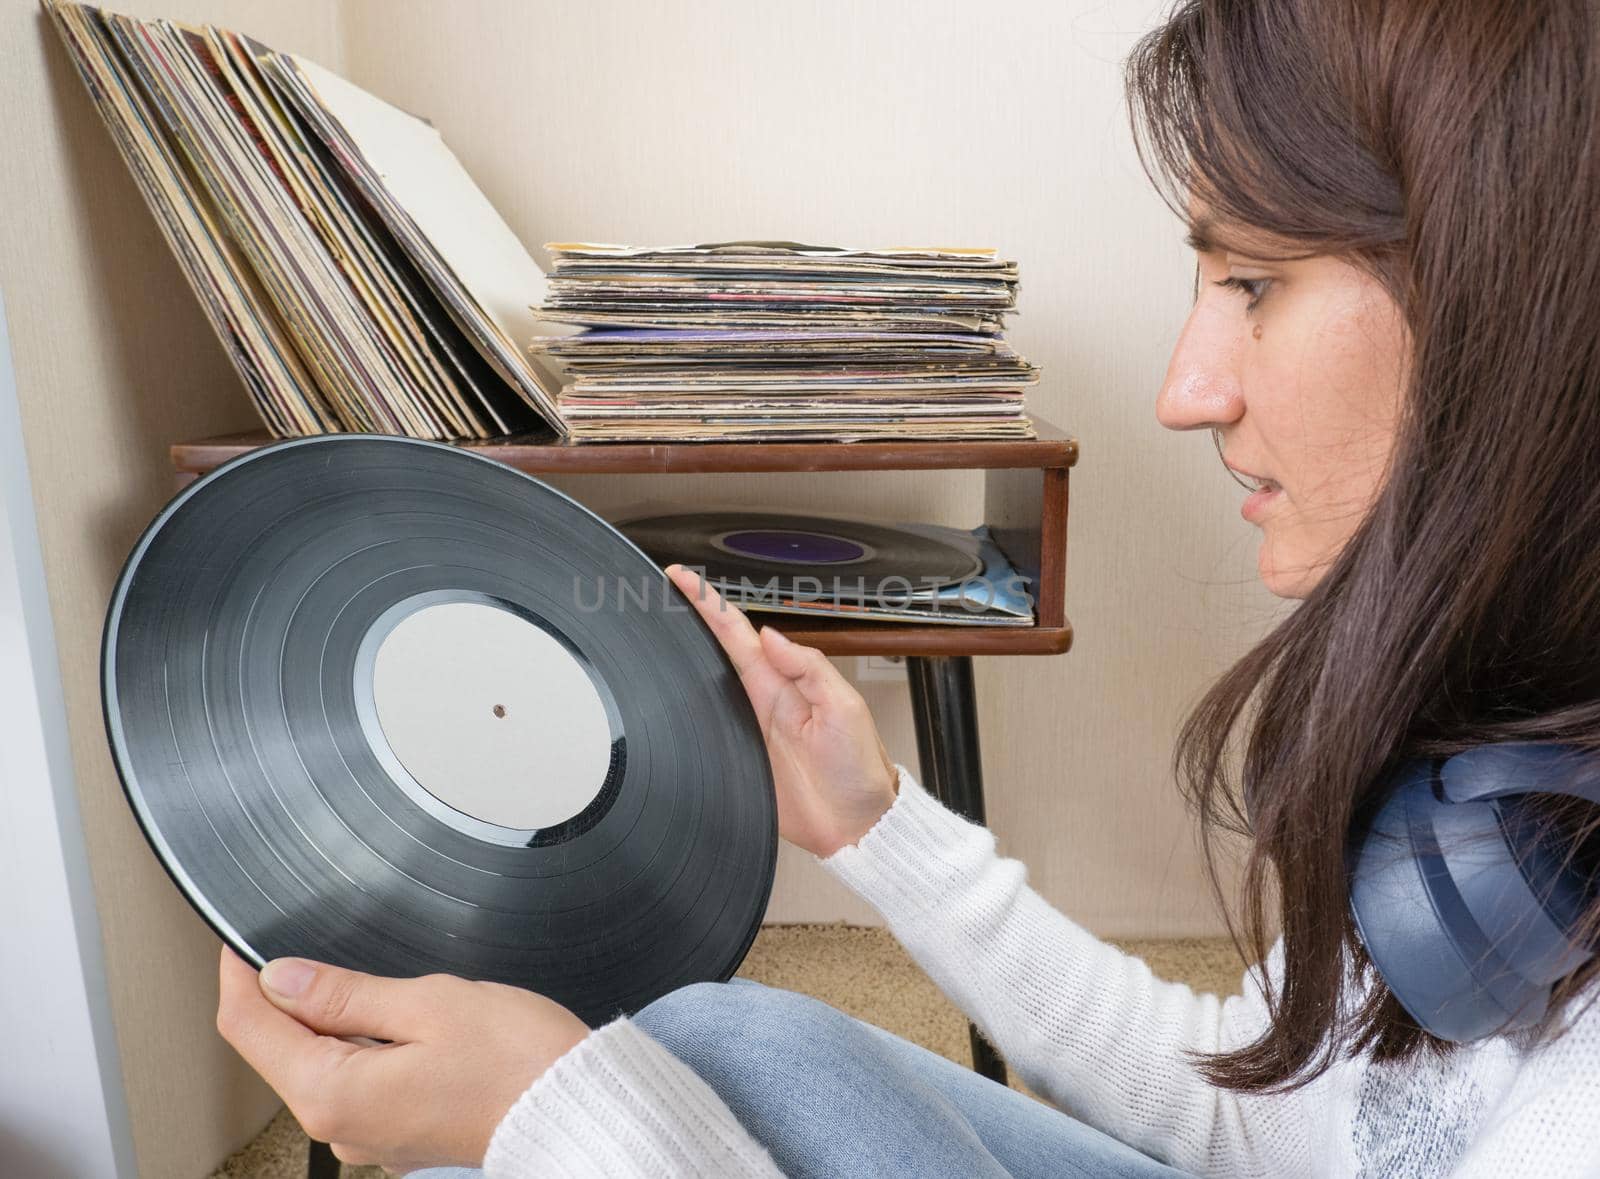 Playing vinyl records. Listening music, leisure time, staying home